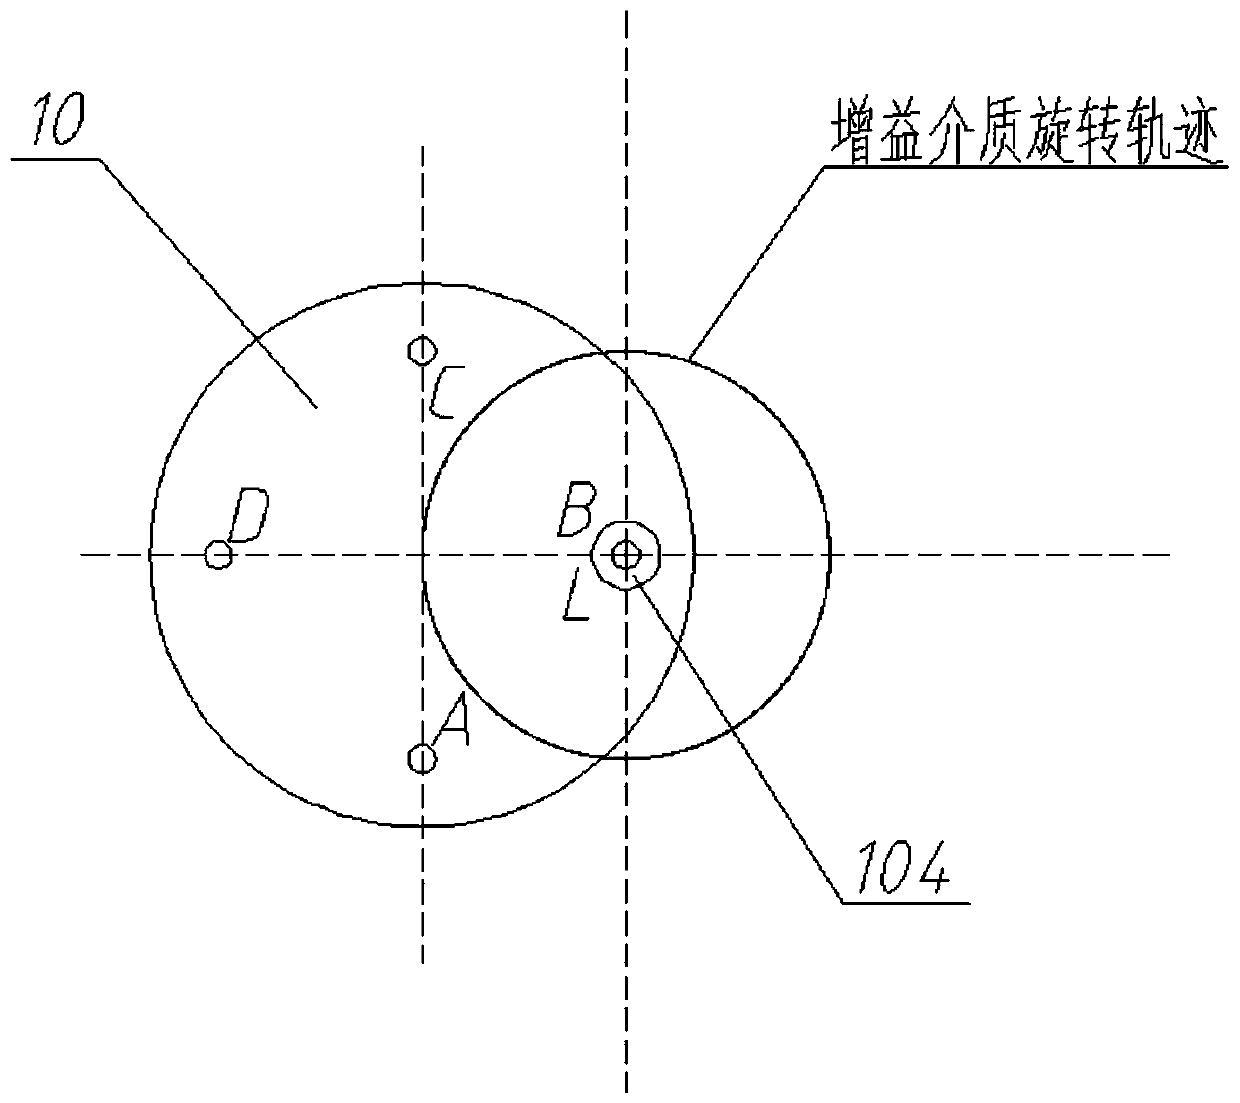 Rotary disc type solid-state laser and water cooling method thereof